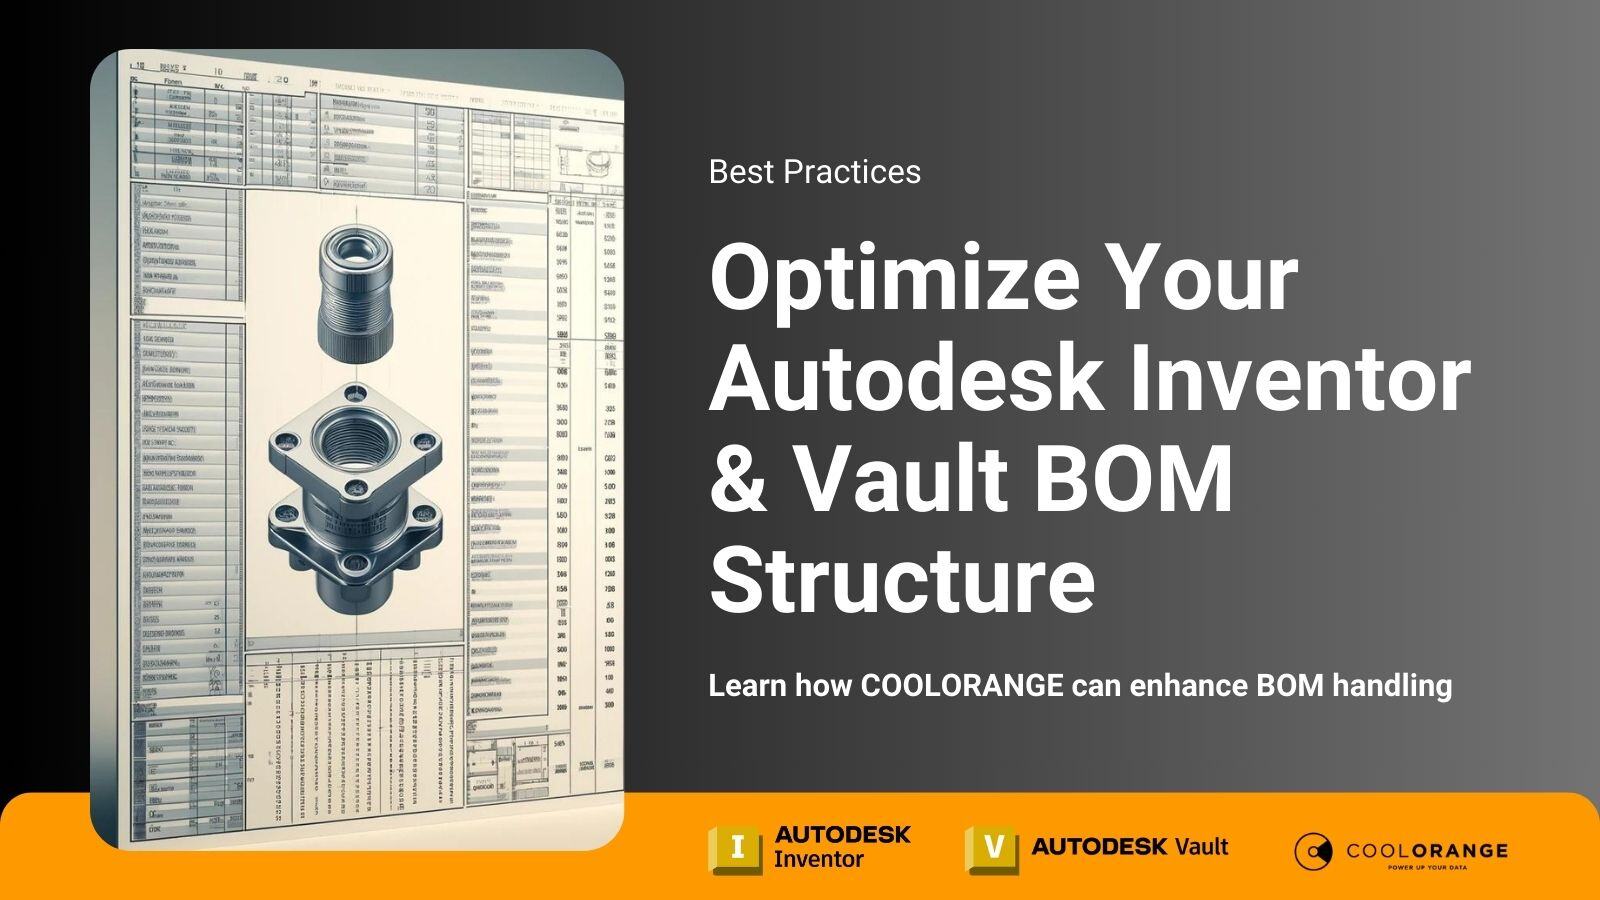 Best Practices for Optimizing Your Autodesk Inventor & Vault BOM Structure